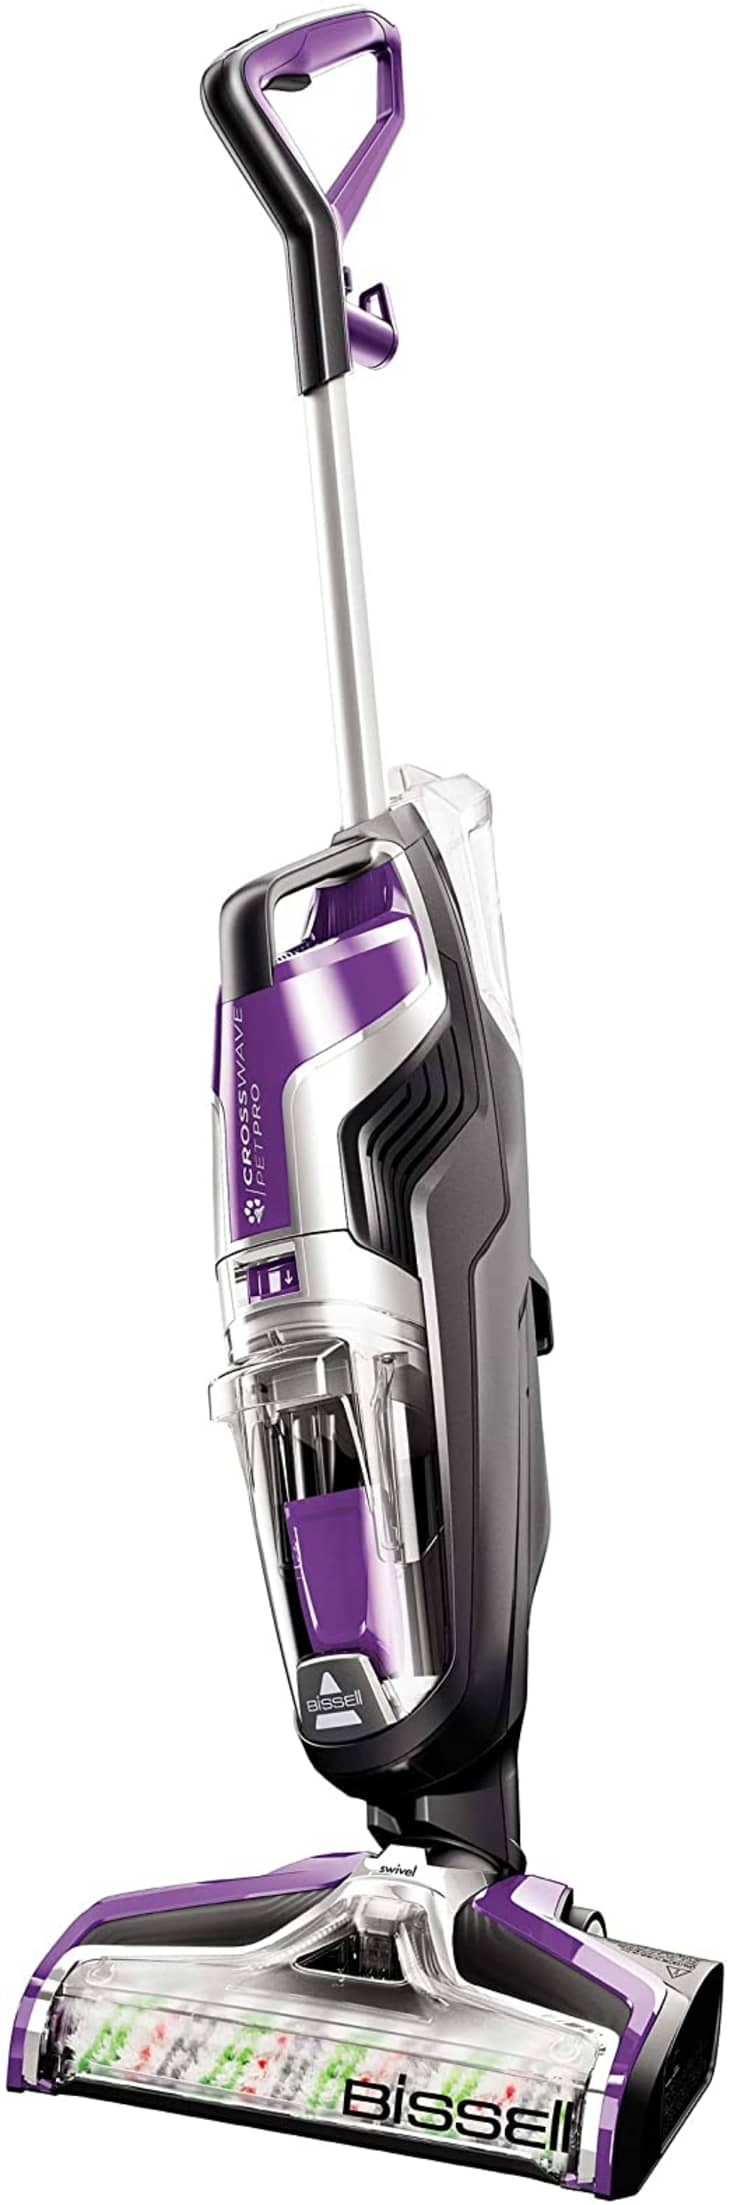 Bissell CrossWave Pet Pro Plus All-in-One Wet Dry Vacuum Cleaner and Mop at Bed Bath & Beyond